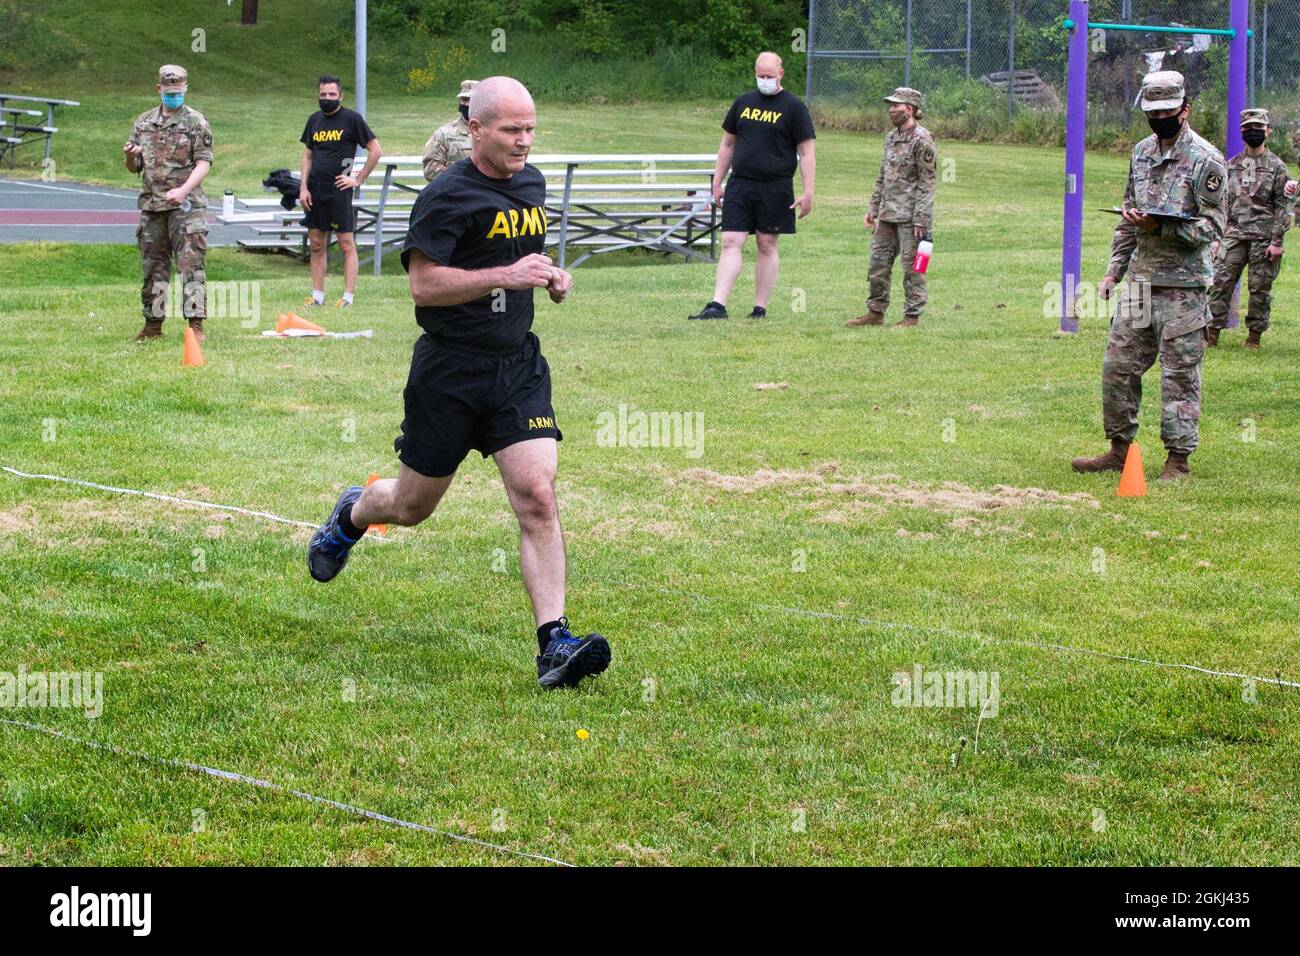 Col. Clint Murray, Commander of the Walter Reed Army Institute of Research, runs during the Sprint-Drag -Carry event as part of the new Army Combat Fitness Test (ACFT), April 29, 2021. The ACFT consists of six events: 3-Repetition Maximum Deadlift, Standing Power Throw, Hand-Release Push-Ups, Sprint-Drag-Carry, Leg Tuck or Plank, and 2-Mile Run. Stock Photo